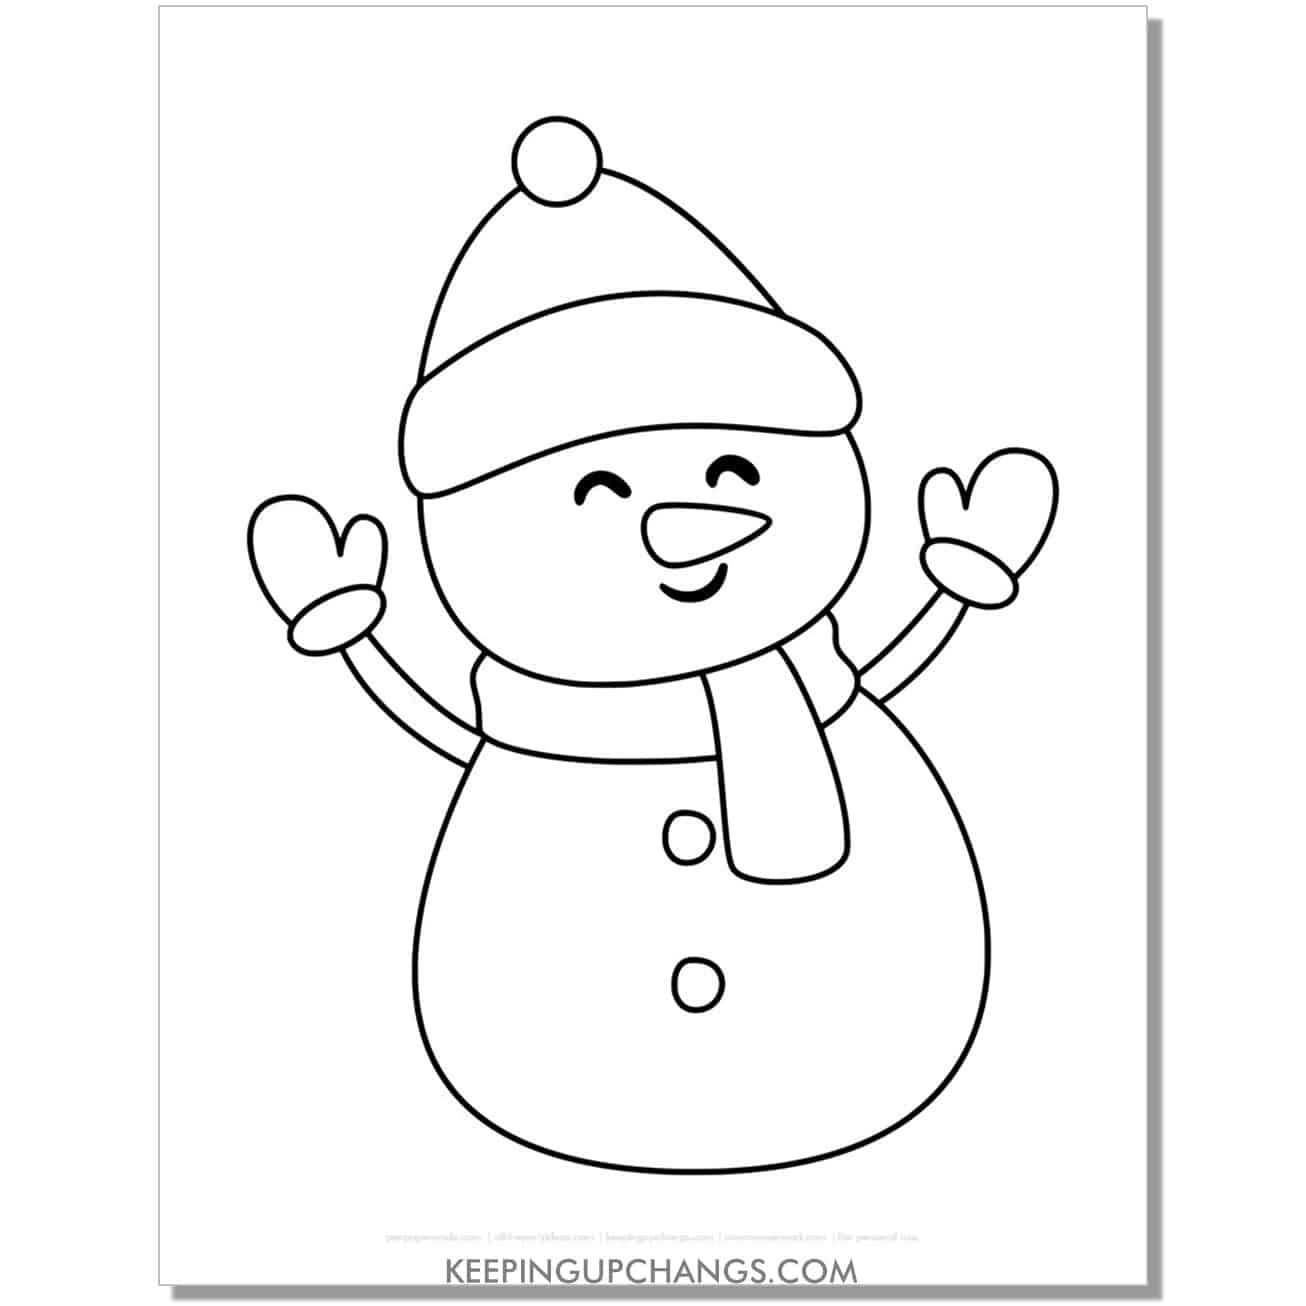 free simple snowman with beanie coloring page.